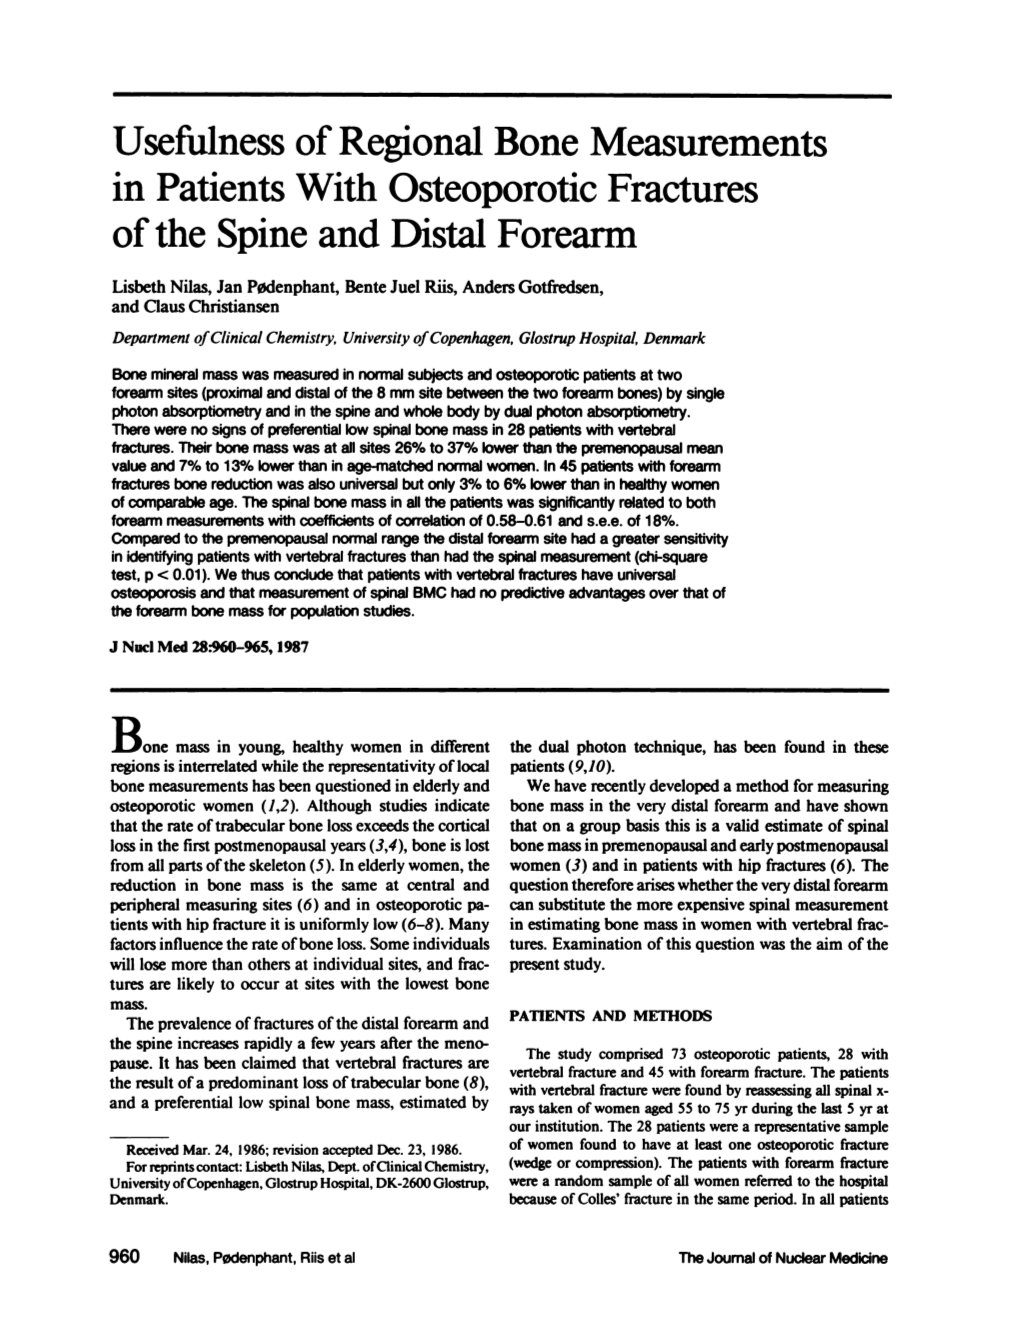 Usefulness of Regional Bone Measurements in Patients with Osteoporotic Fractures of the Spine and Distal Forearm